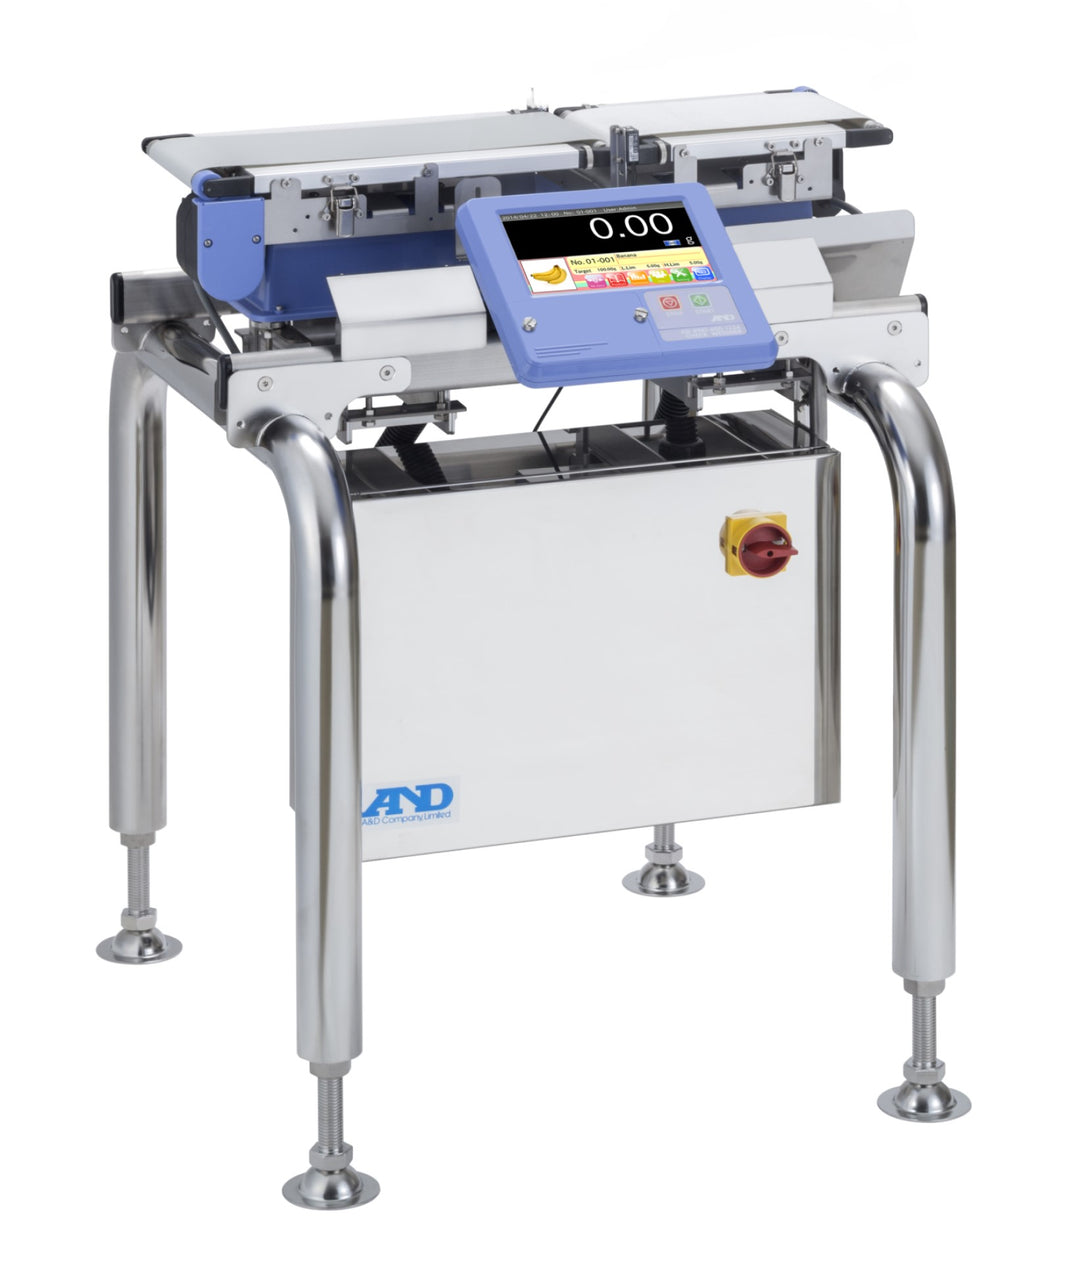 A&D 600g In-Motion Checkweigher - AD-4961-600-1224